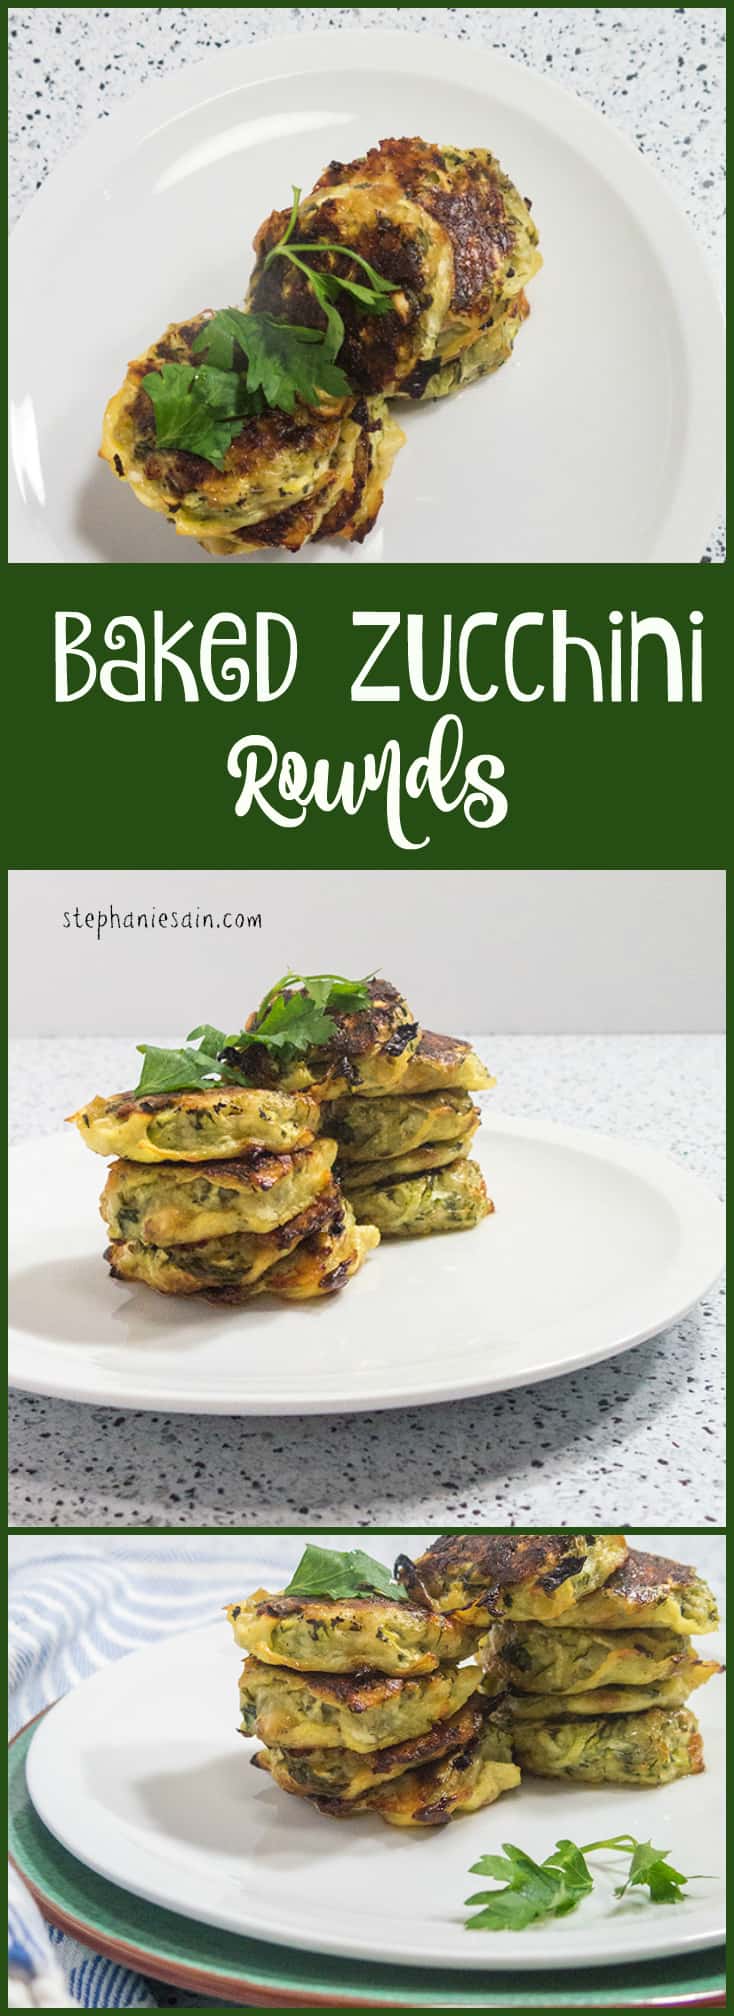 Baked Zucchini Rounds are a tasty, healthy little bite sized treat perfect with almost anything. Also great served as an appetizer. Vegetarian and Gluten Free.